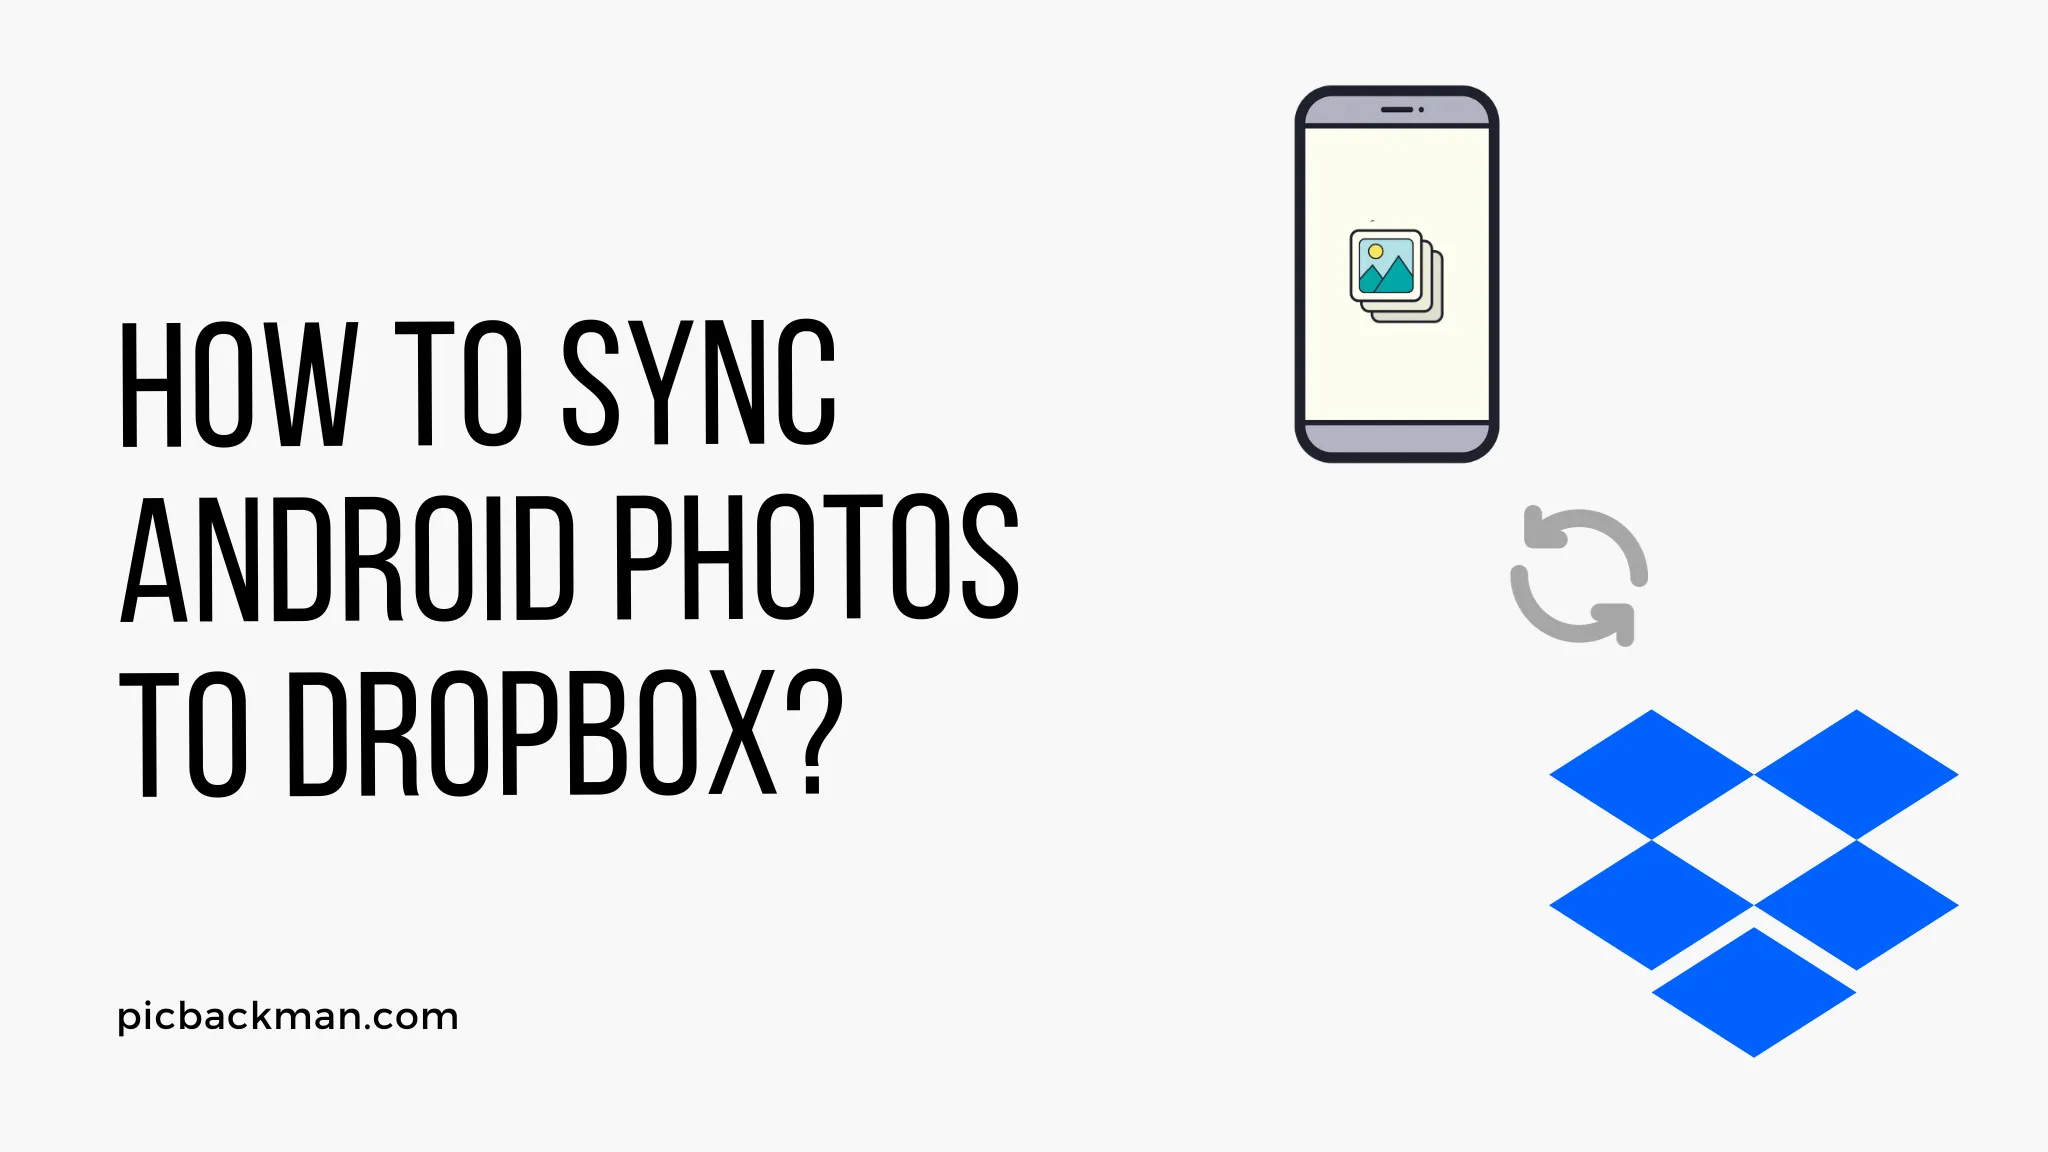 How to Sync Android Photos To Dropbox?